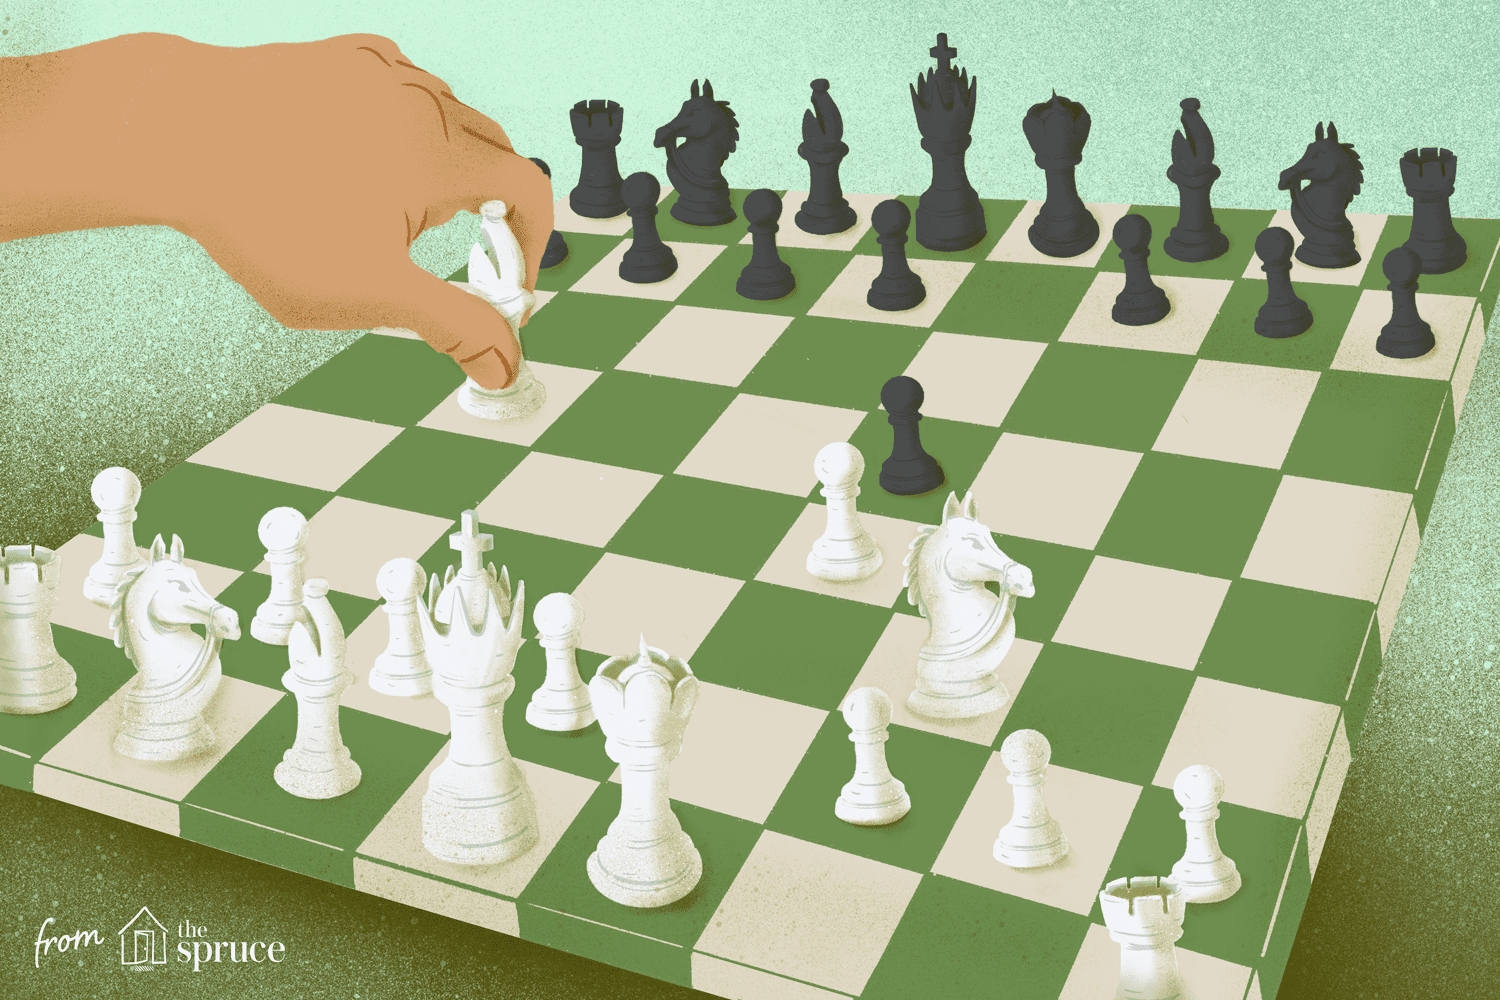 Top 5 Needed Chess Strategy for Grandmaster - How to Win in Chess Tournaments